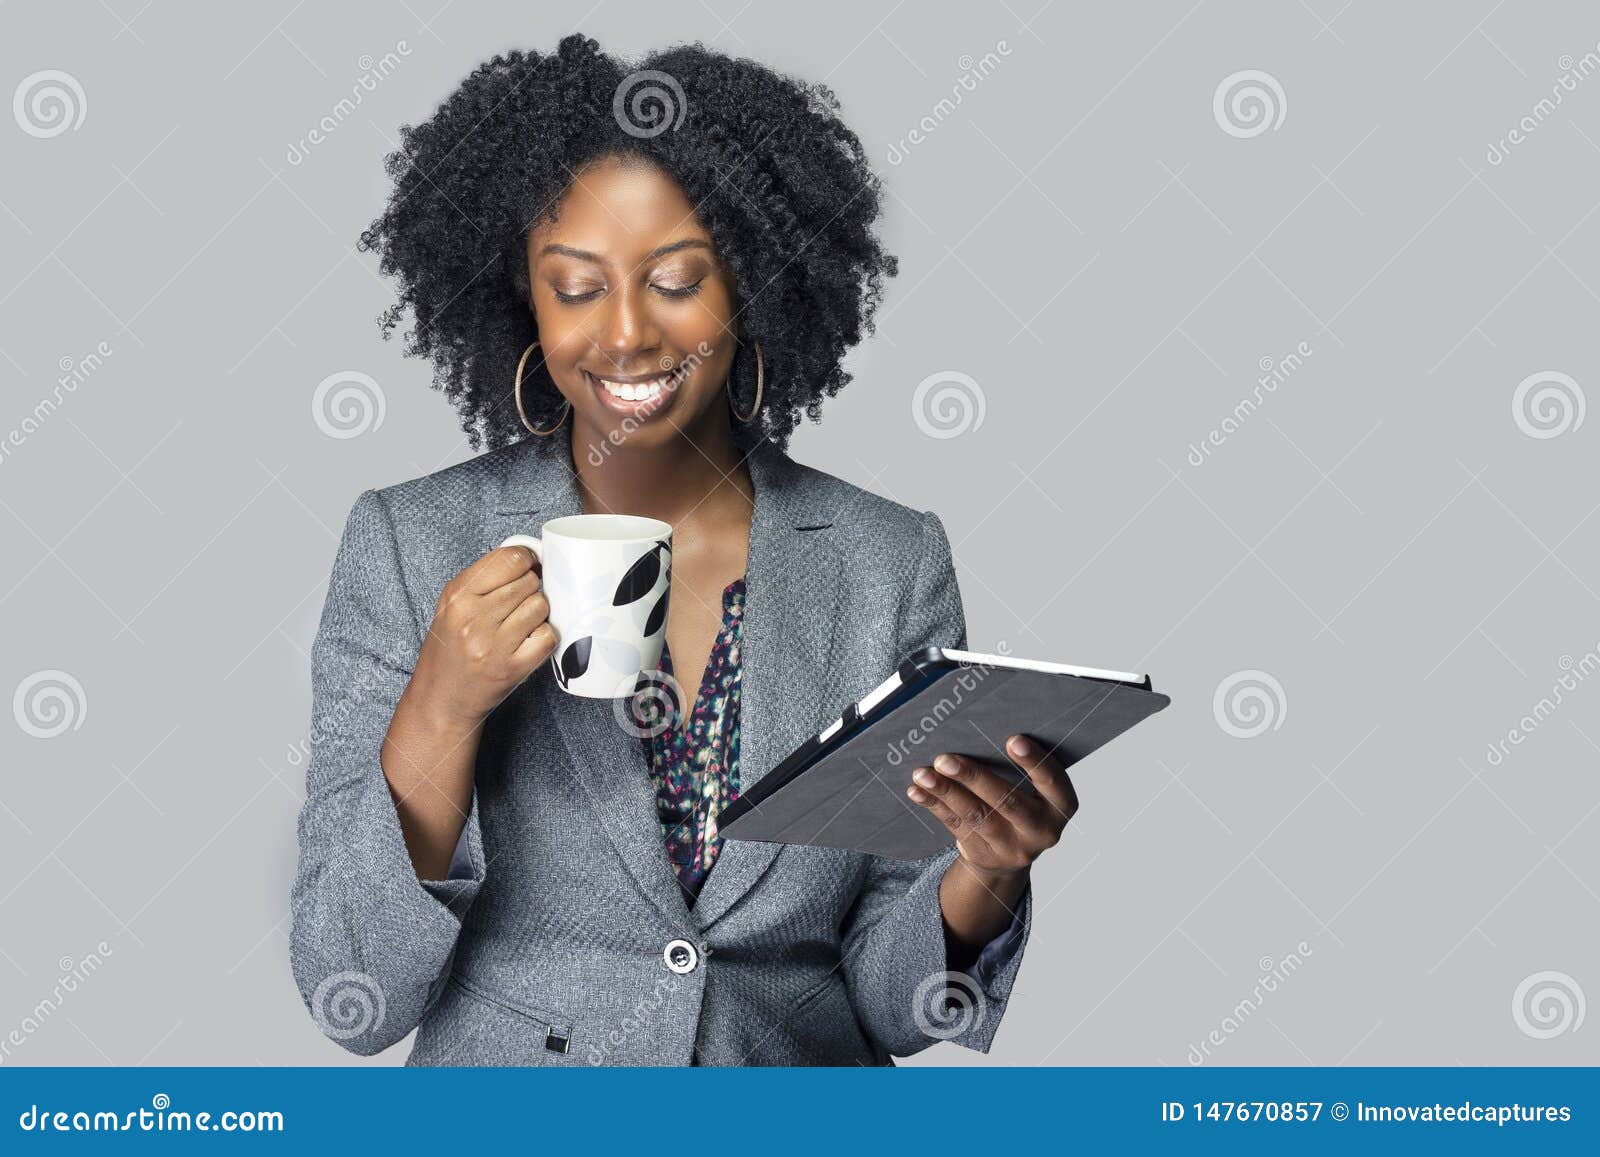 black female businesswoman keynote speaker posing with a tablet and coffee